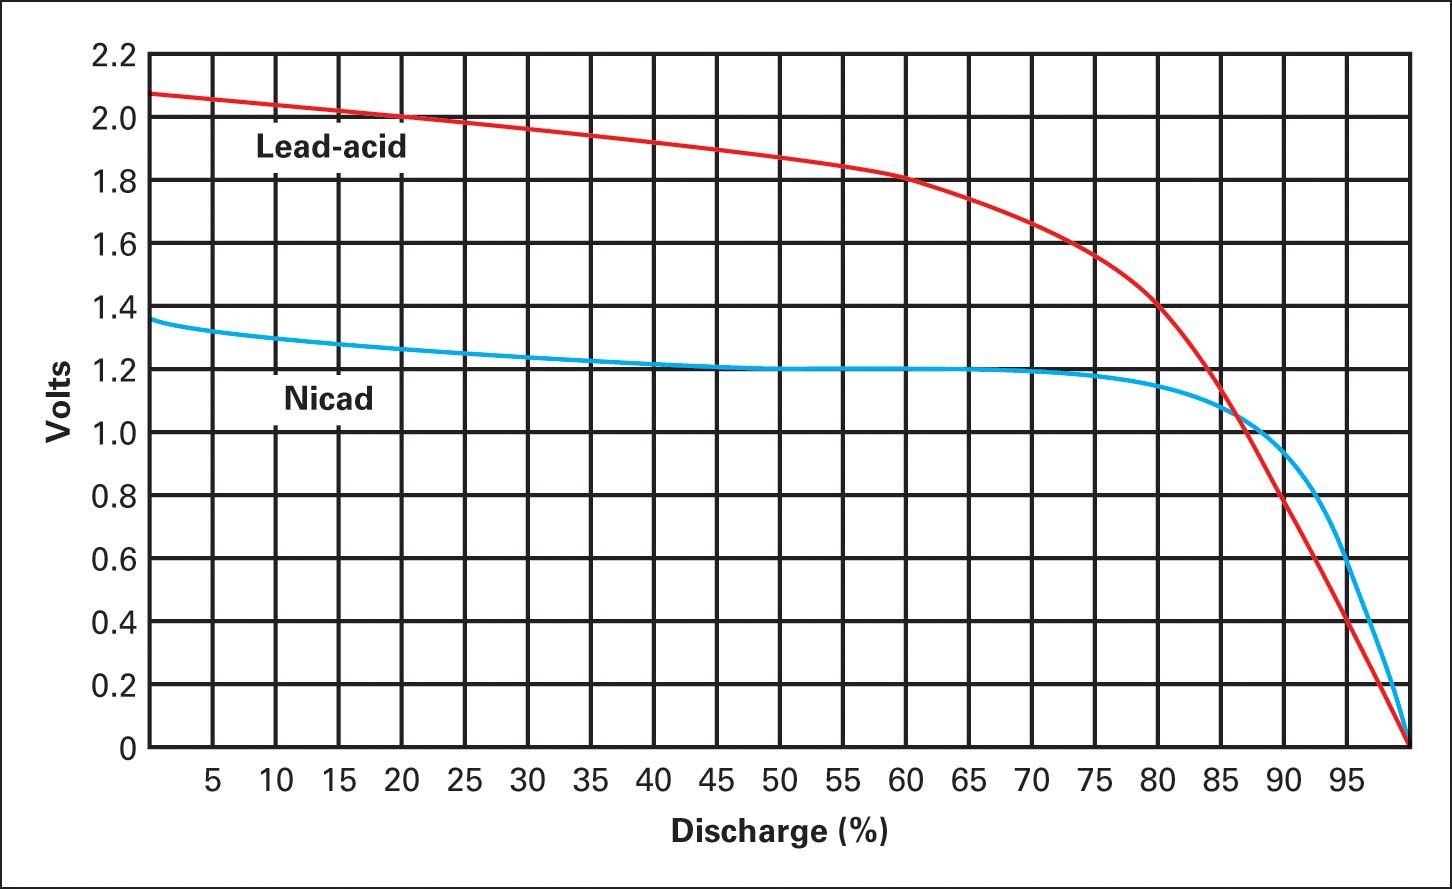 Typical discharge curves for NiCad and lead-acid cells